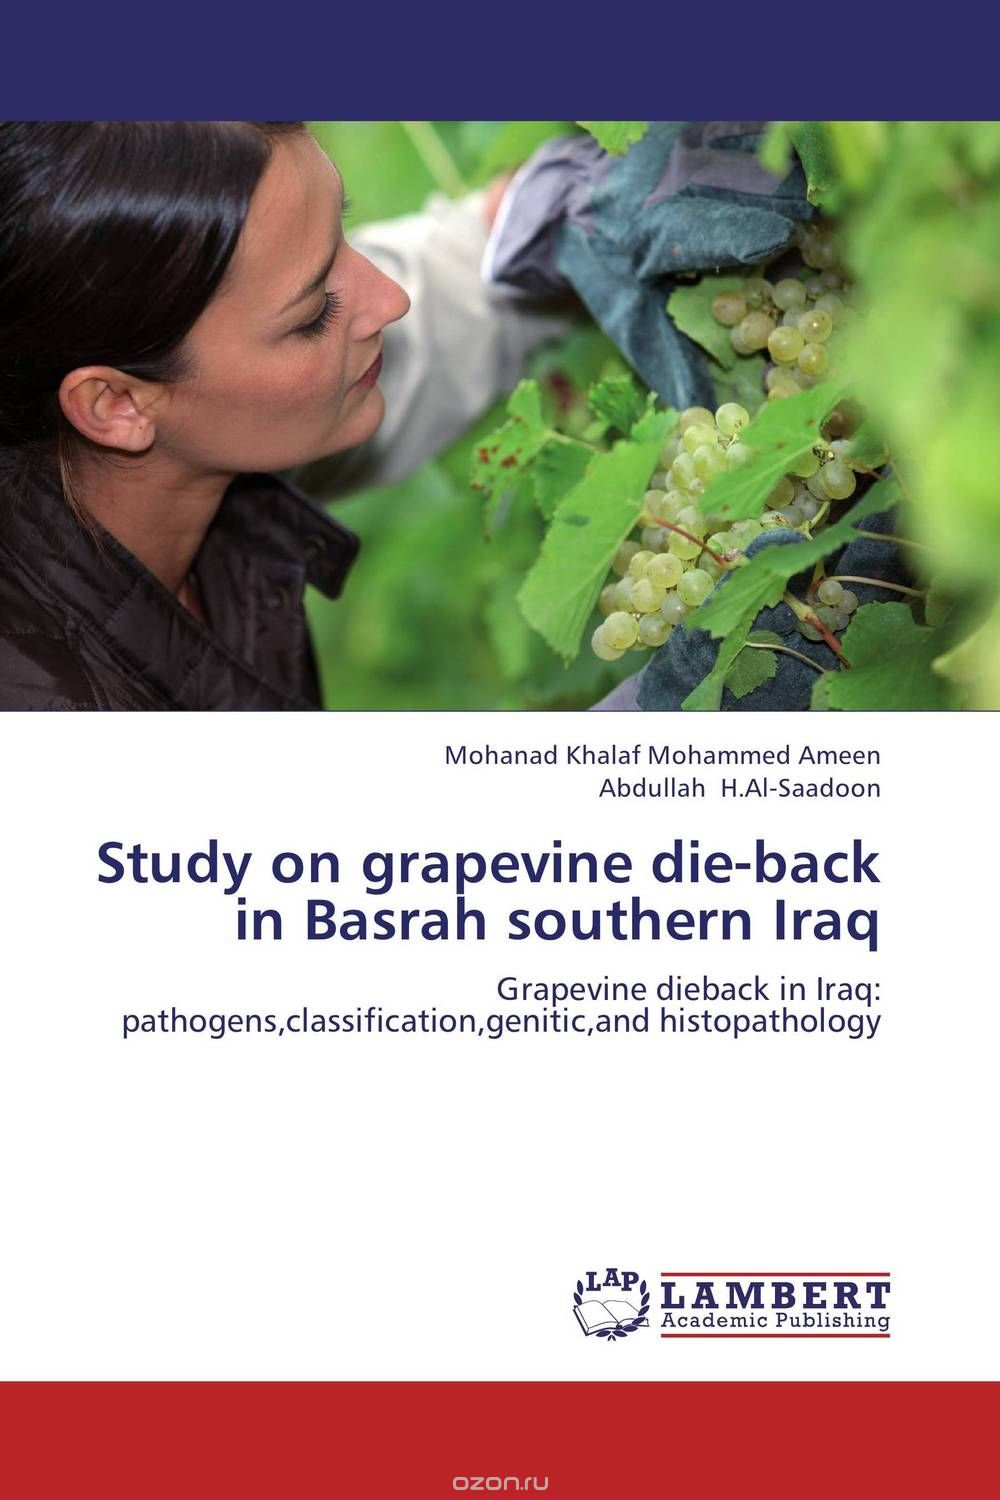 Study on grapevine die-back in Basrah southern Iraq